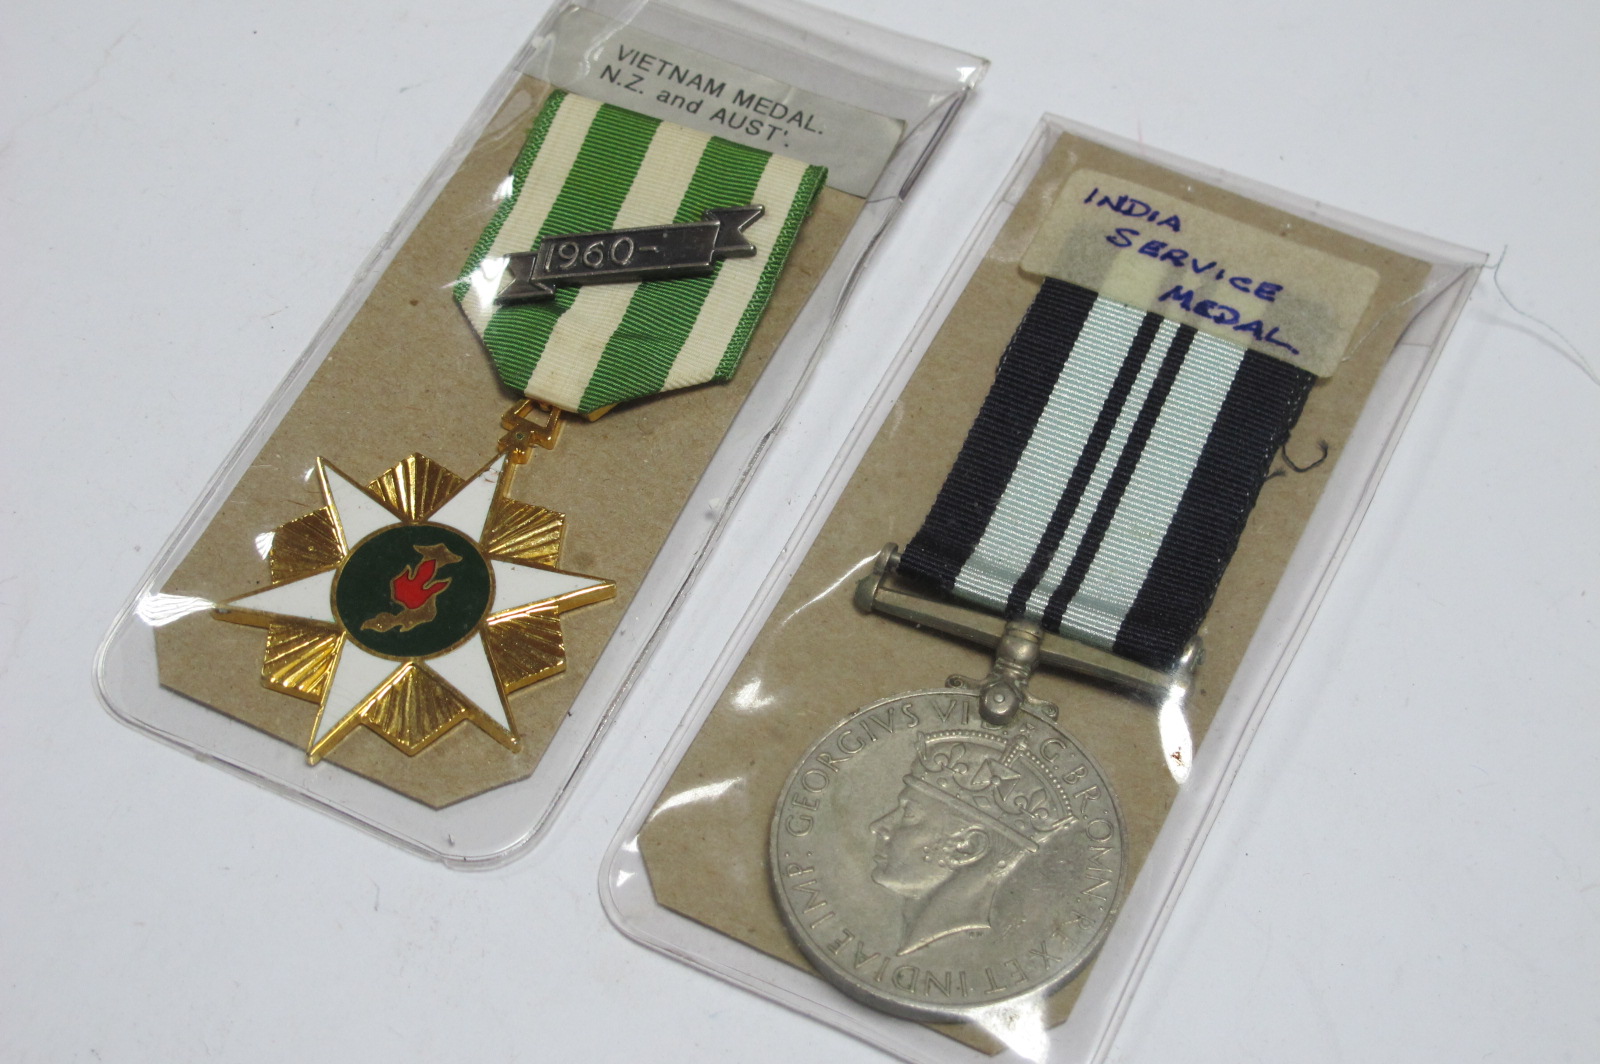 A George VI India Service Medal and a Vietnam Campaign Medal.